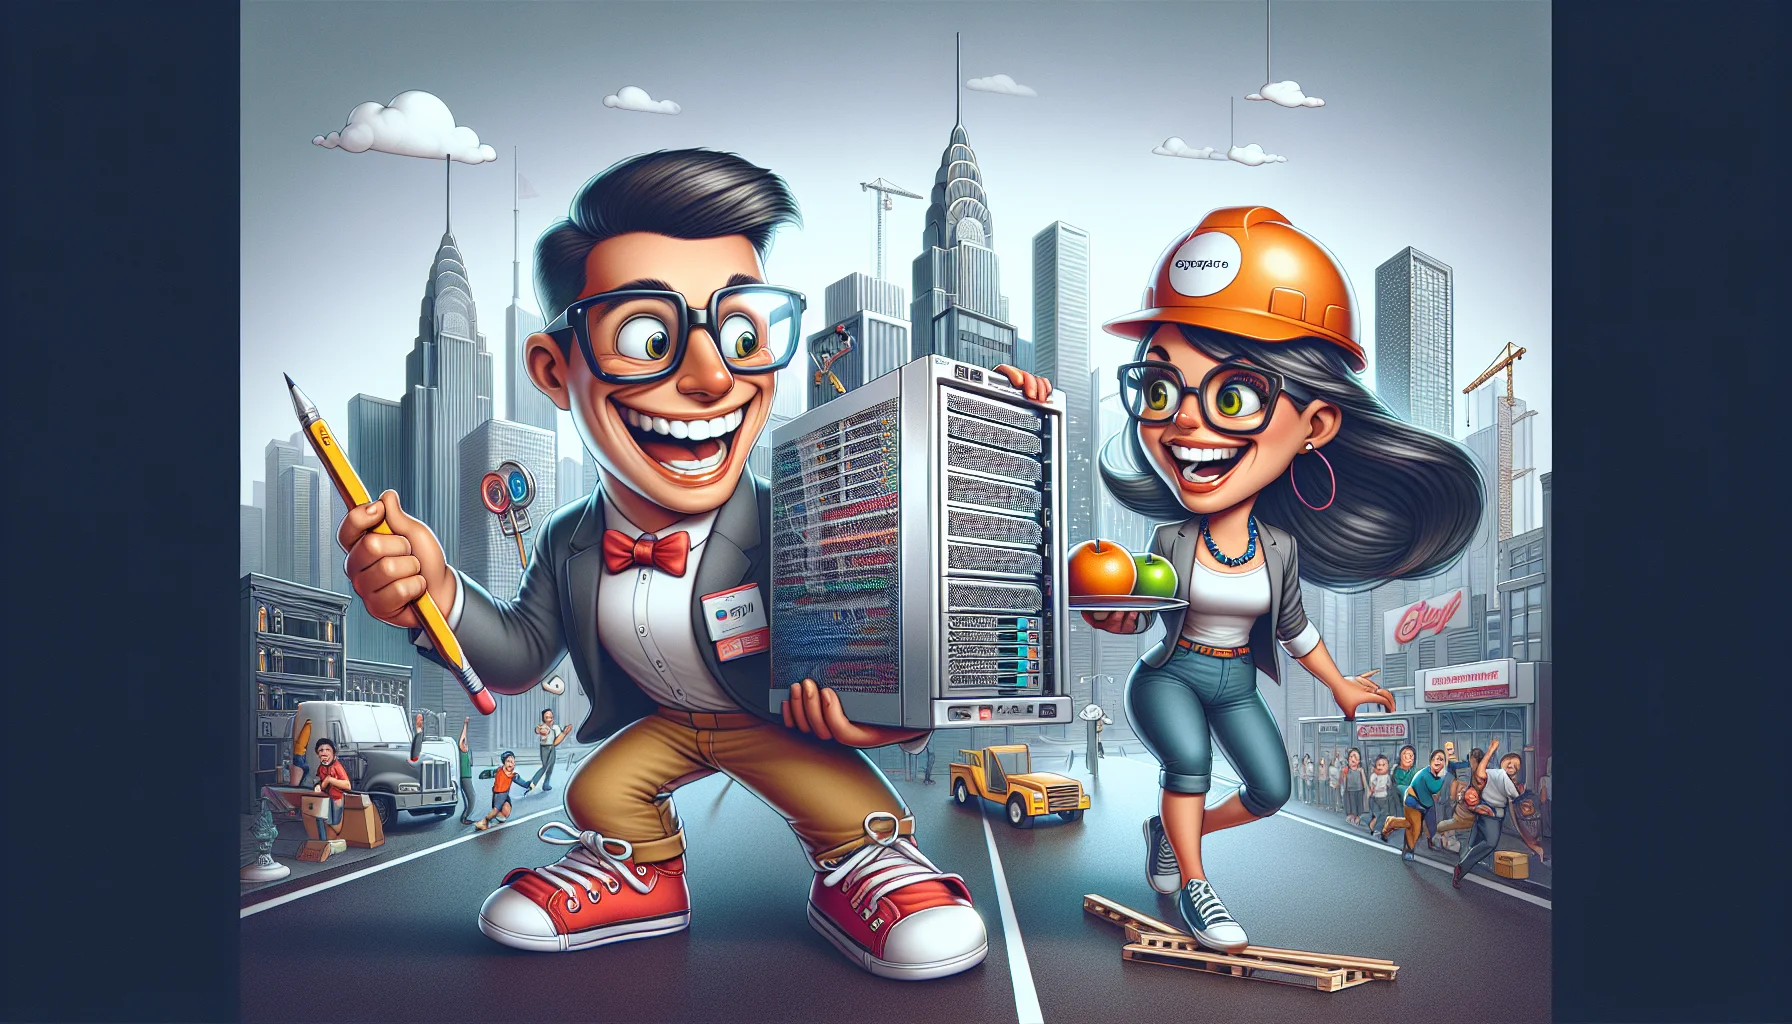 Create a whimsical and realistic illustration where two anthropomorphized mascots, one representing Figma and one Squarespace, are engaged in a friendly competition. The Figma mascot, a jovial Caucasian man with glasses and a designer's toolkit, holds up a beautifully detailed web design mockup. The Squarespace mascot, an energetic Hispanic woman with a business suit and a construction helmet, presents a shining silver server. Their playful banter about web hosting alongside a bustling city backdrop – signifying the digital world – should convey a sense of fun and excitement about the process.